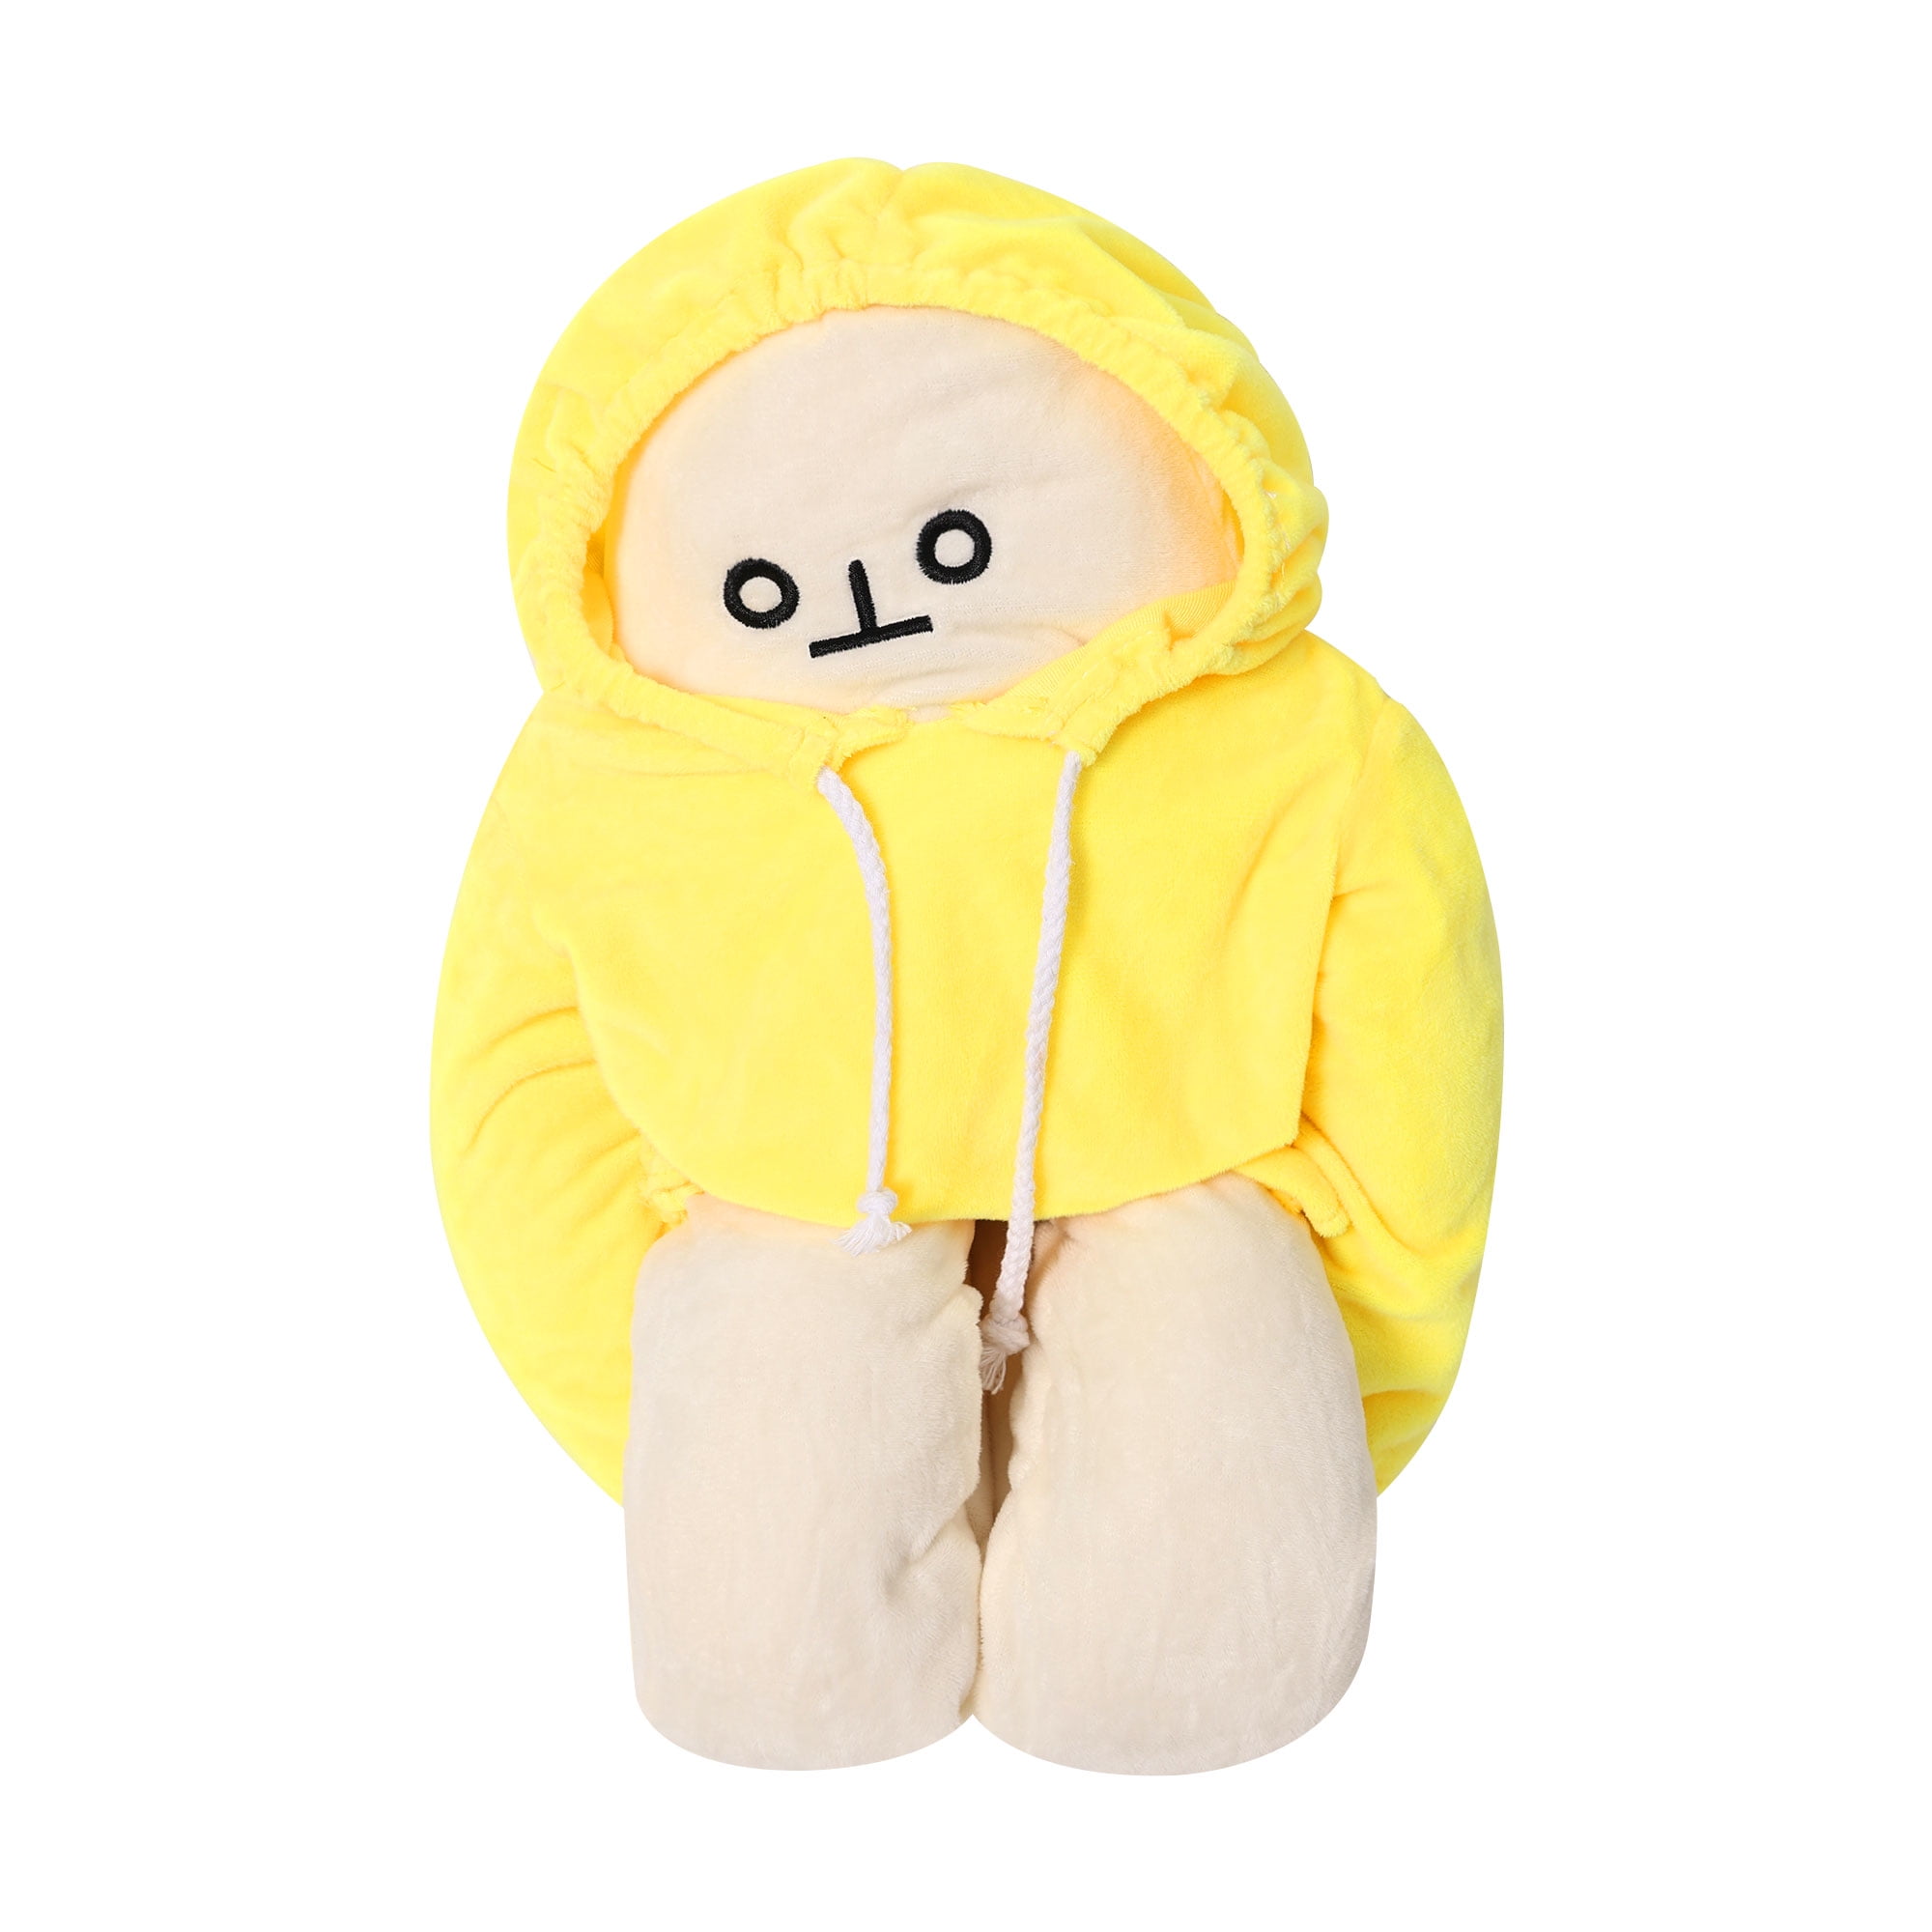 MGFAION 16 Inch Banana Doll Plush Stuffed Man Toy with Magnet, Funny  Changeable Pillow Stress Release Hugs Toys Christmas Birthday Gifts for  Kids Boys